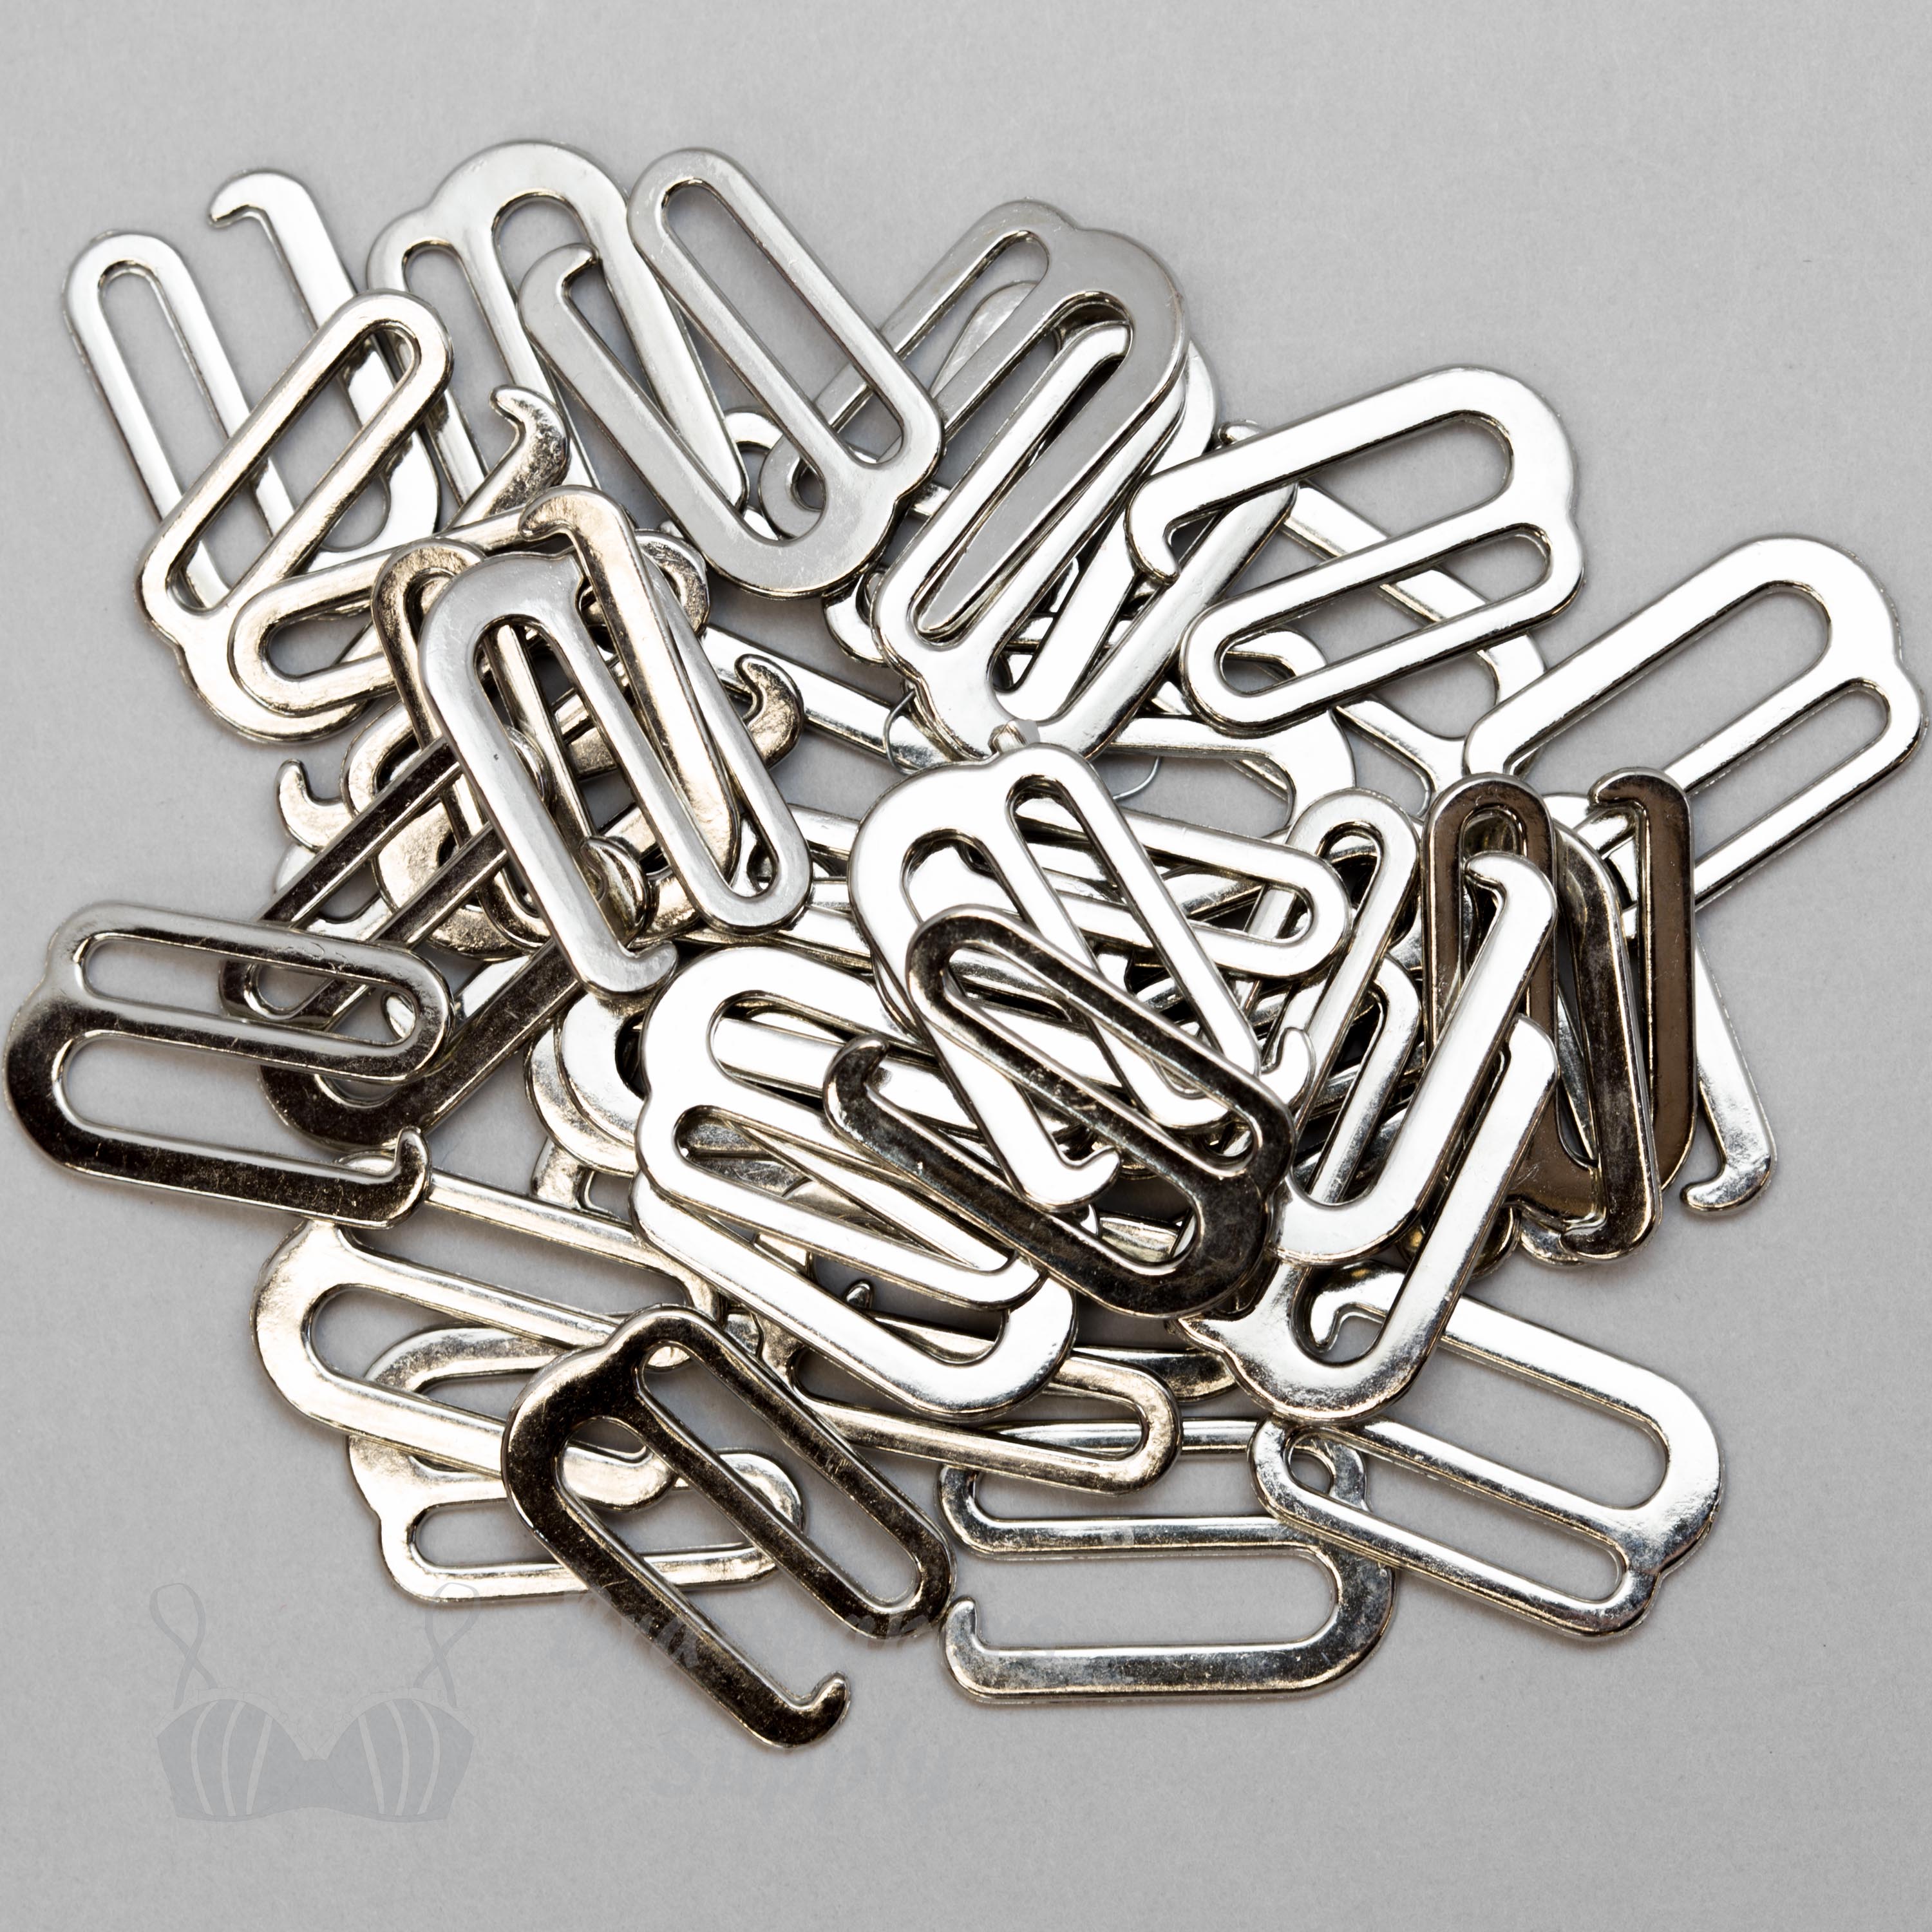 Hesroicy 10Pcs Bra Hooks Electroplating Process Strong Material